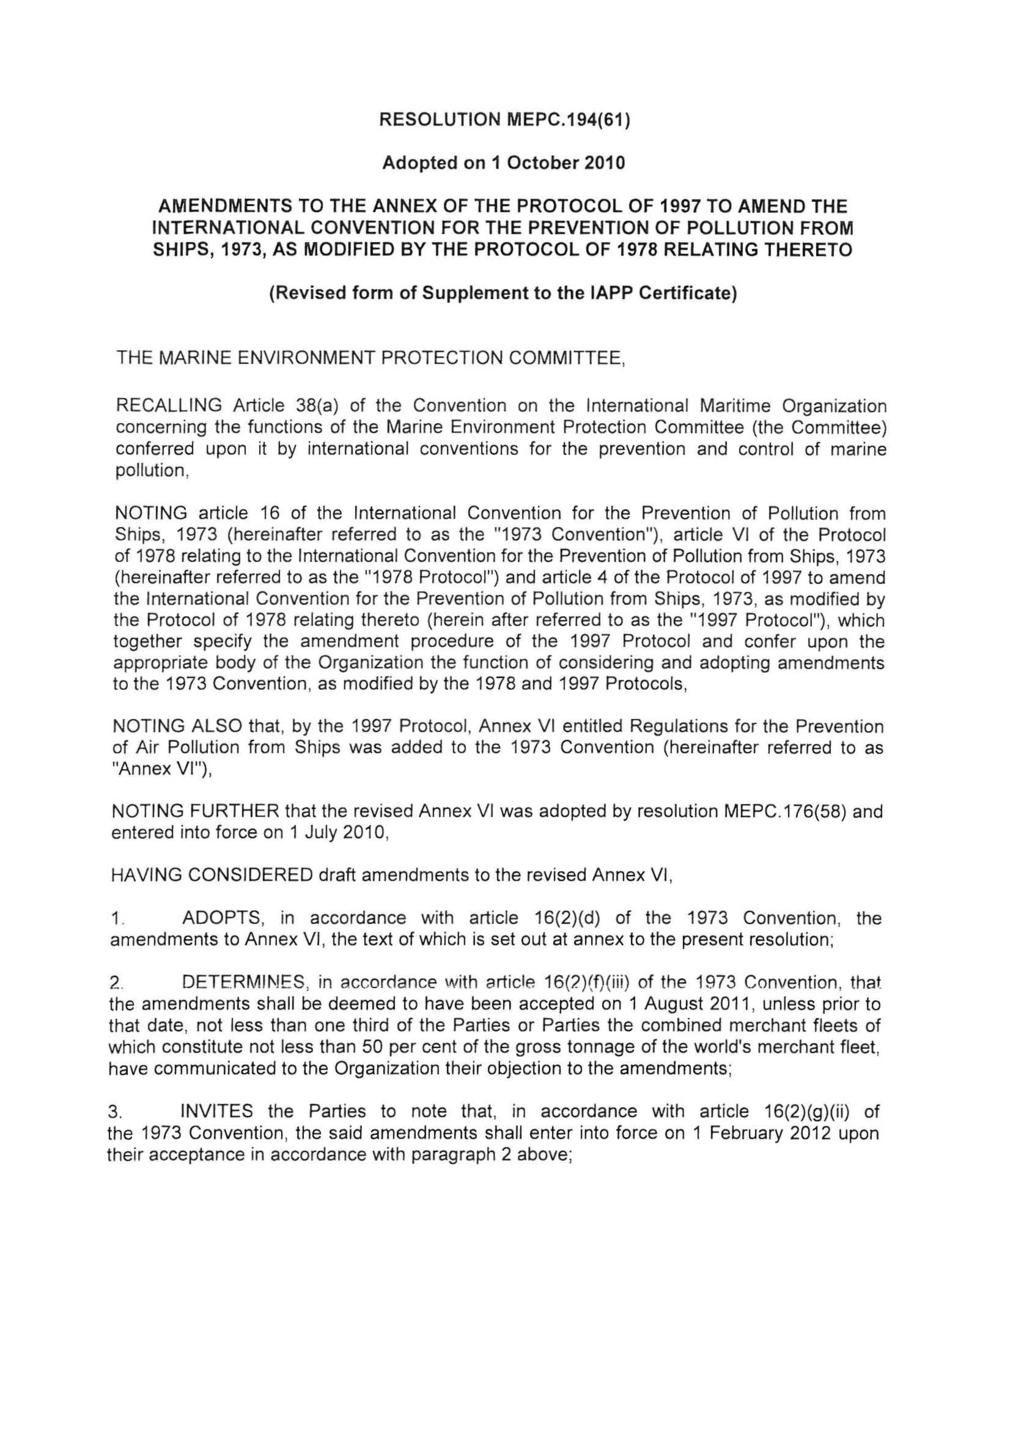 AMENDMENTS TO THE ANNEX OF THE PROTOCOL OF 1997 TO AMEND THE INTERNATIONAL CONVENTION FOR THE PREVENTION OF POLLUTION FROM SHIPS, 1973, AS MODIFIED BY THE PROTOCOL OF 1978 RELATING THERETO (Revised